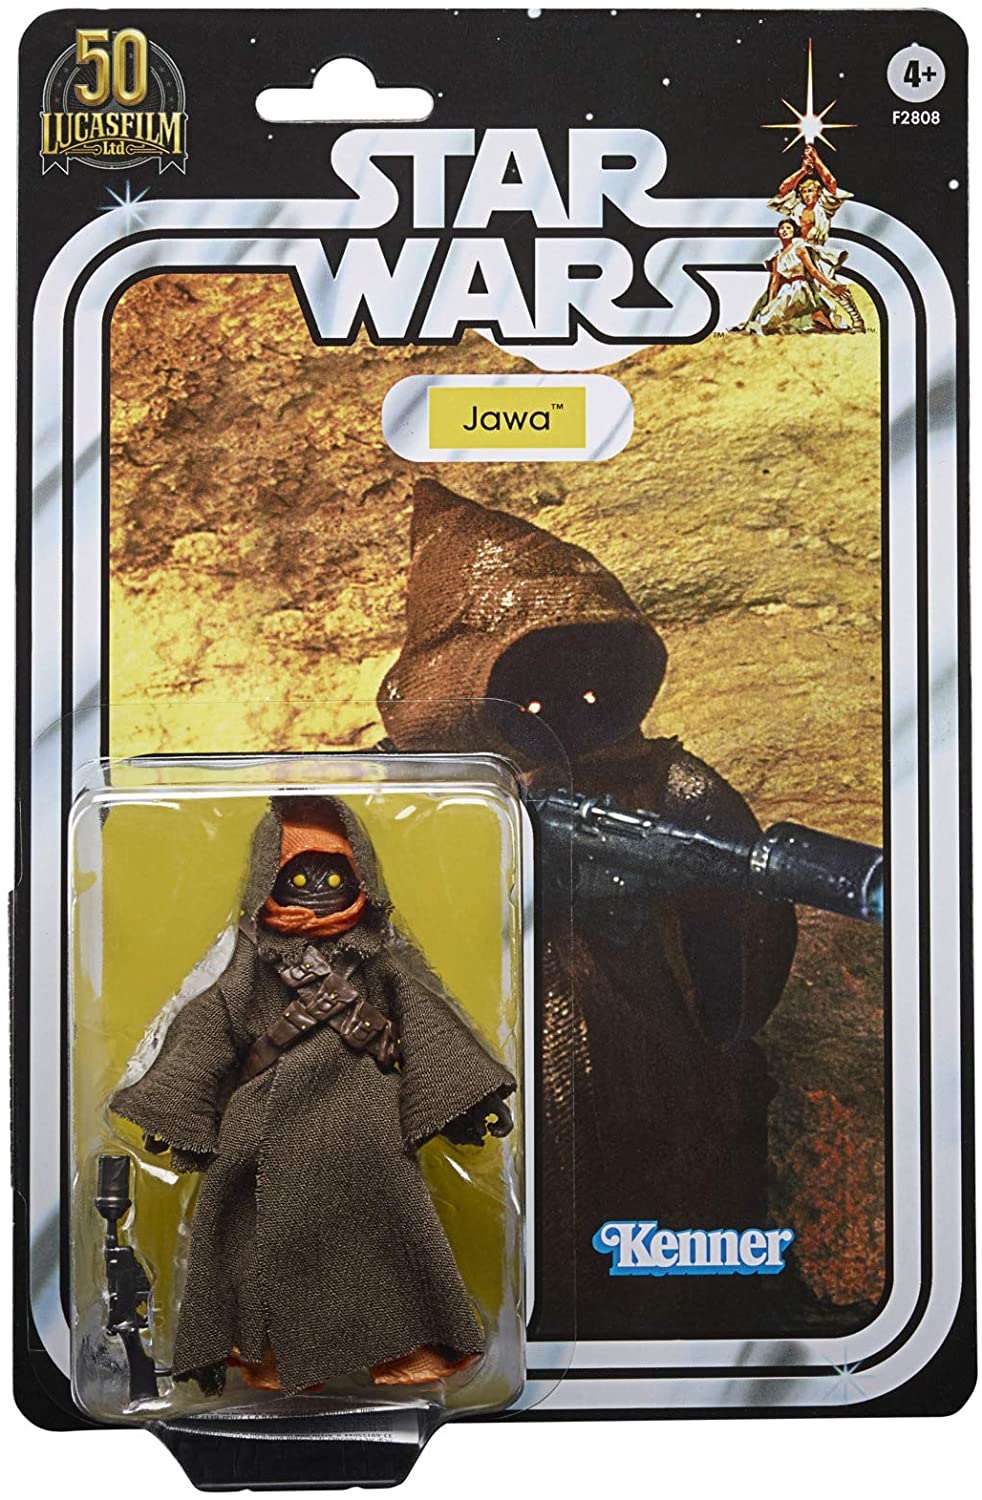 Star Wars The Black Series Jawa 6-Inch-Scale Lucasfilm 50th Anniversary Original Trilogy Collectible Figure in packaging